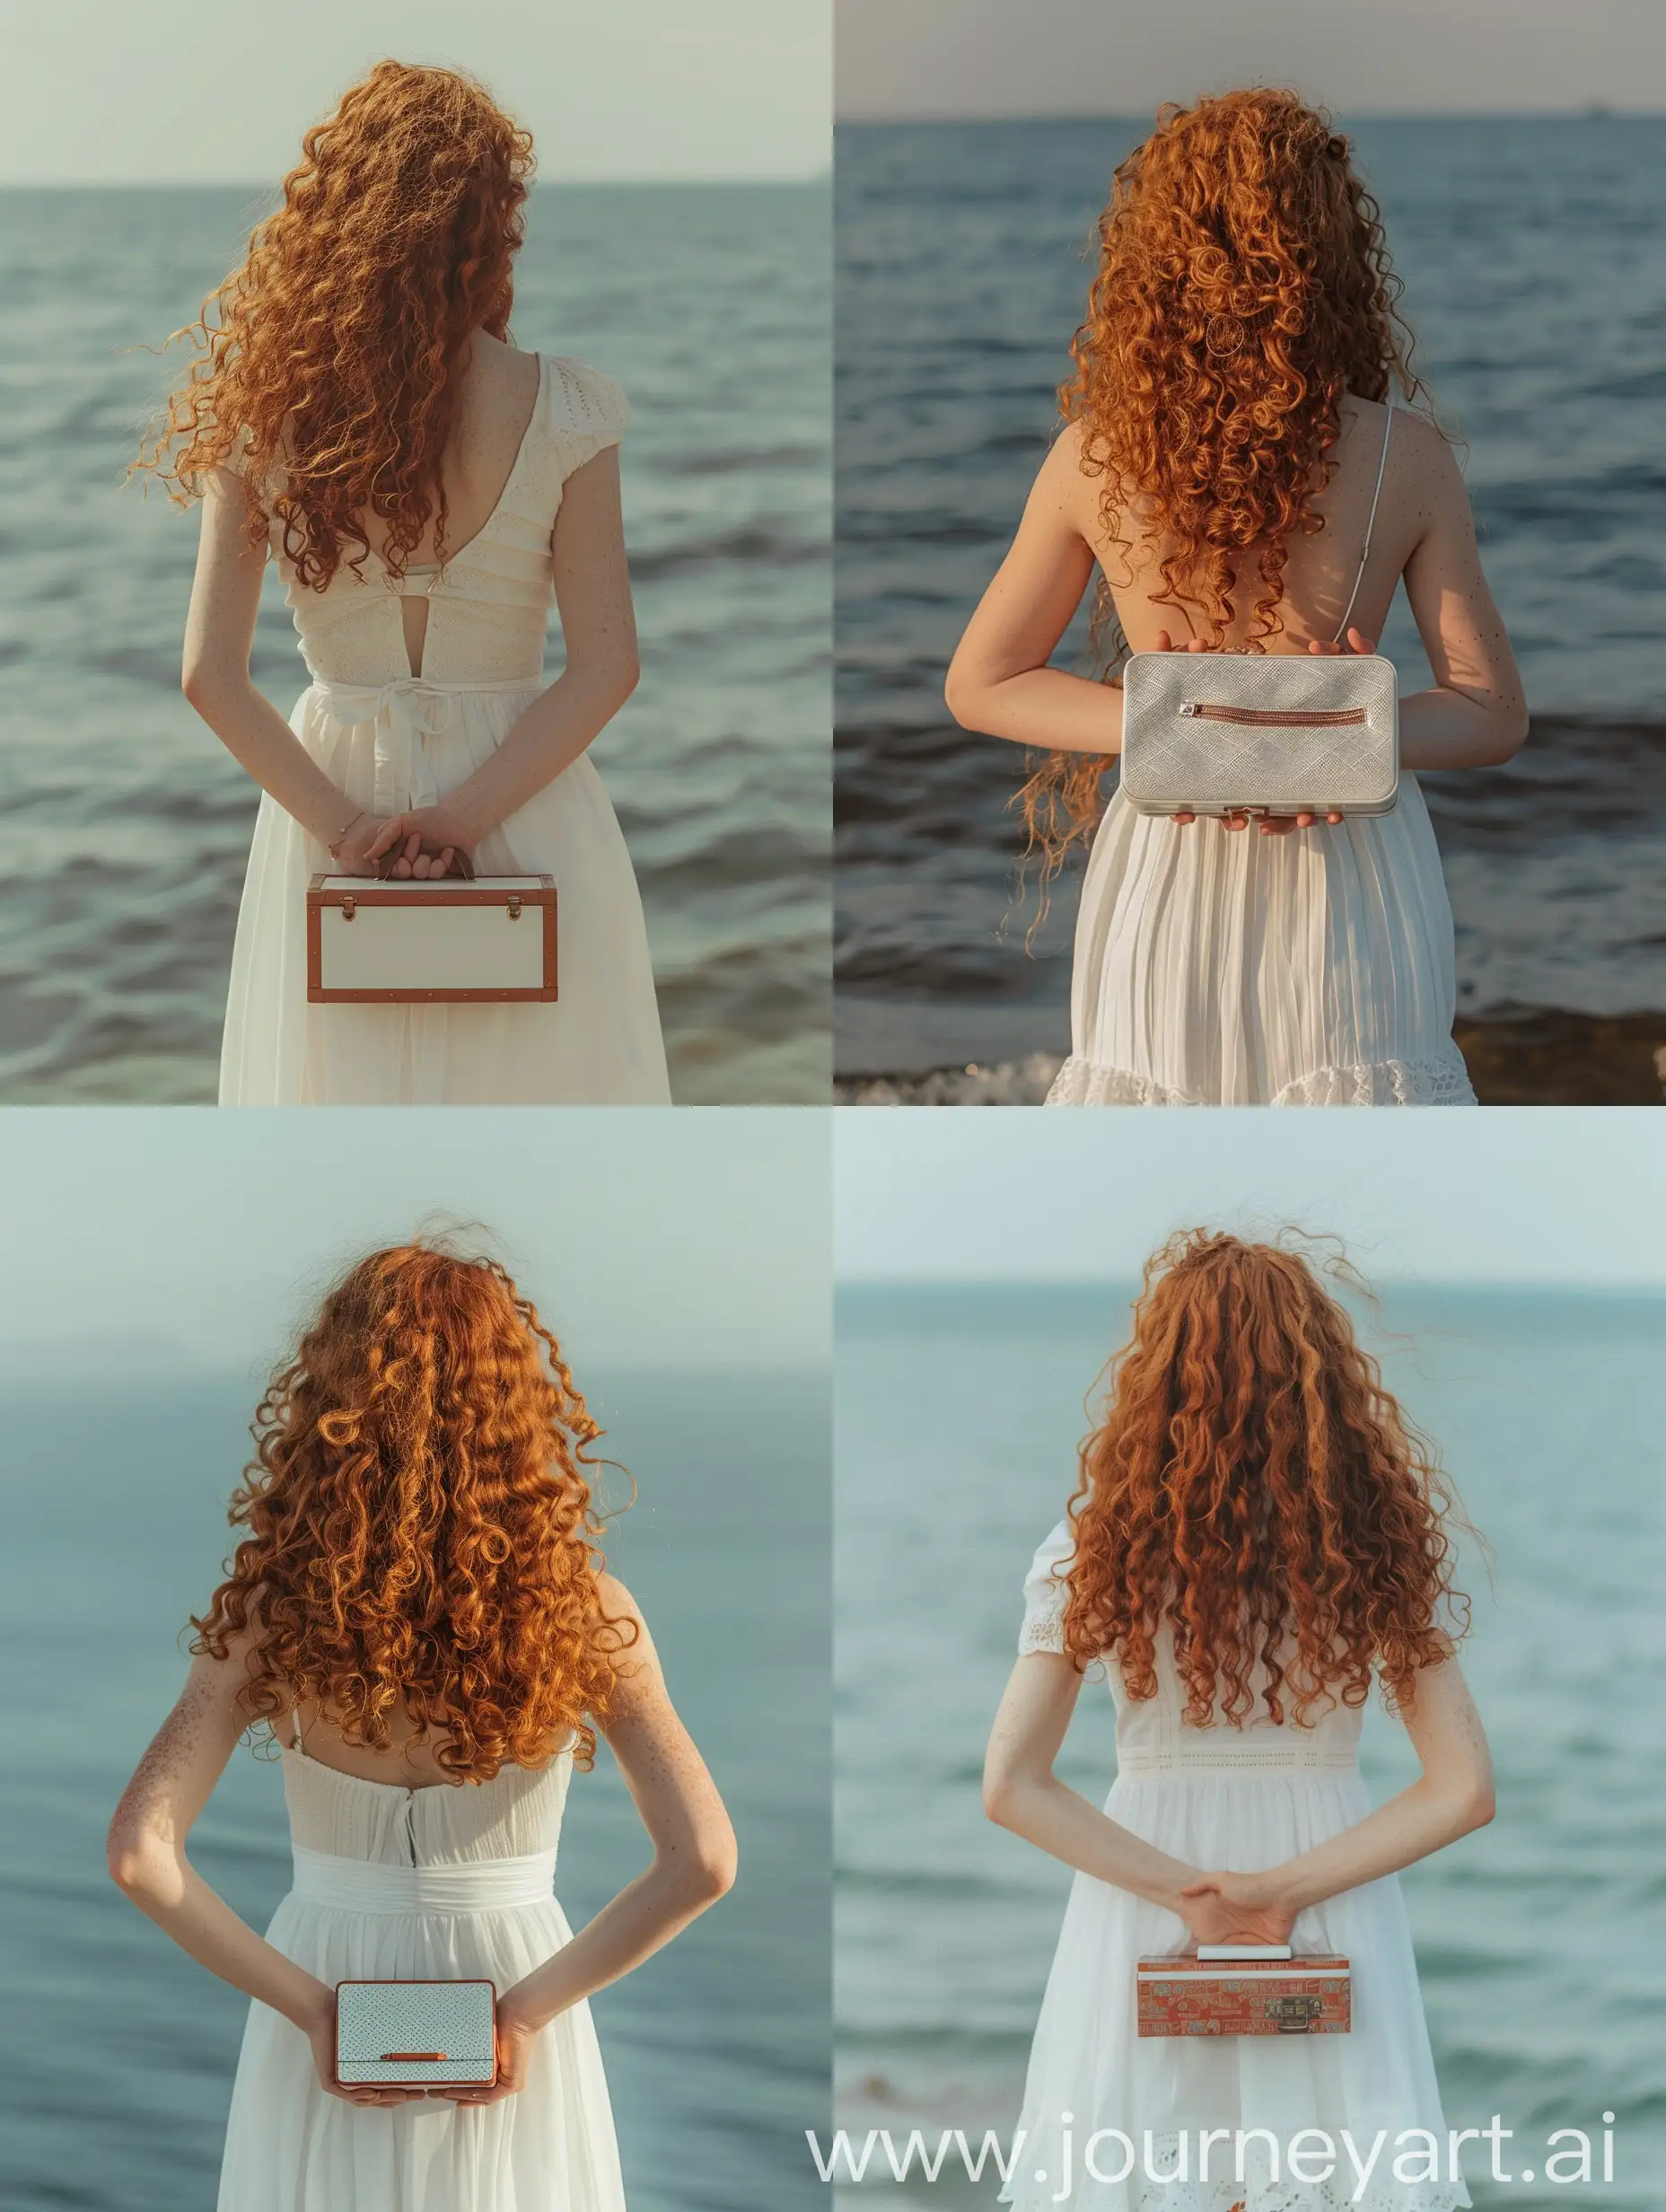 A red-haired curly-haired girl with long hair stands with her back to the camera in a summer white dress against the background of the sea, her hands behind her back holding a small rectangular suitcase-a beauty case